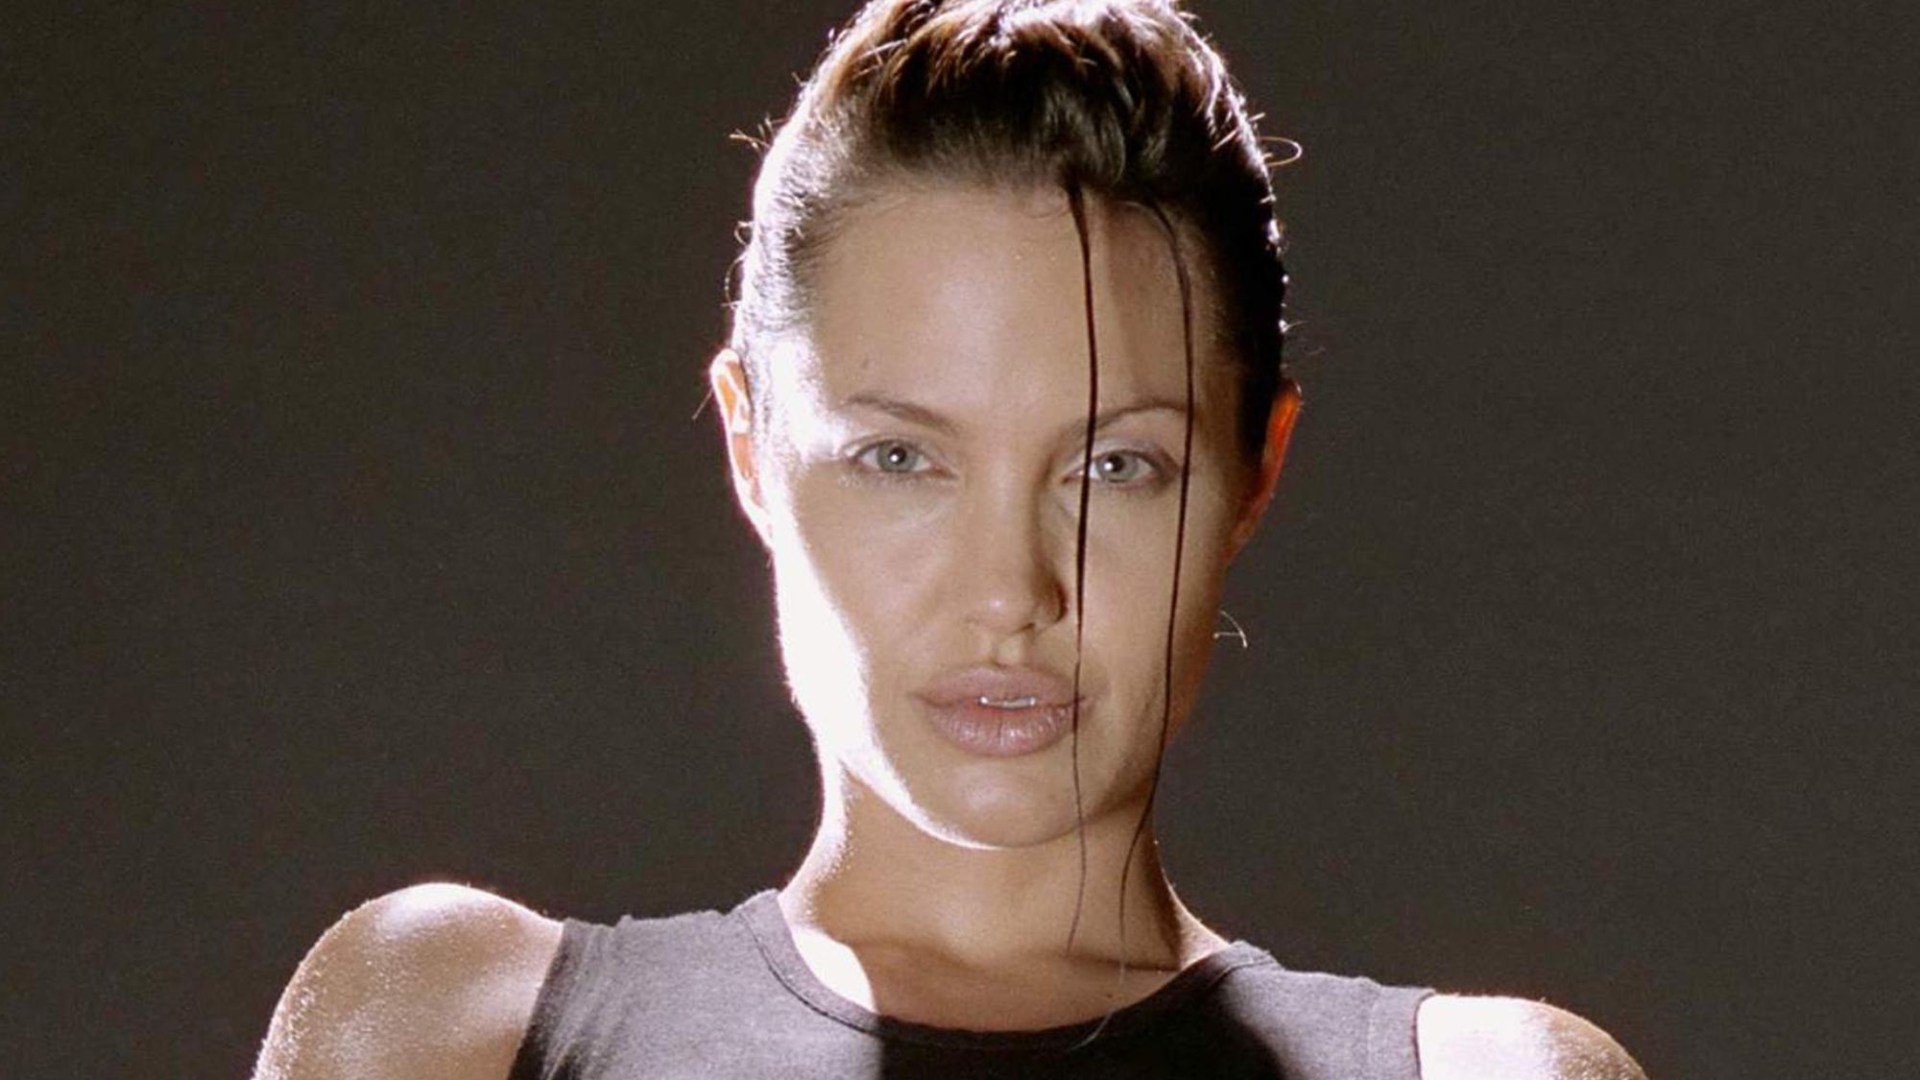 Lara Croft Voted Most Iconic Video Game Character Ever – See if Your Favorite Made the Cut!